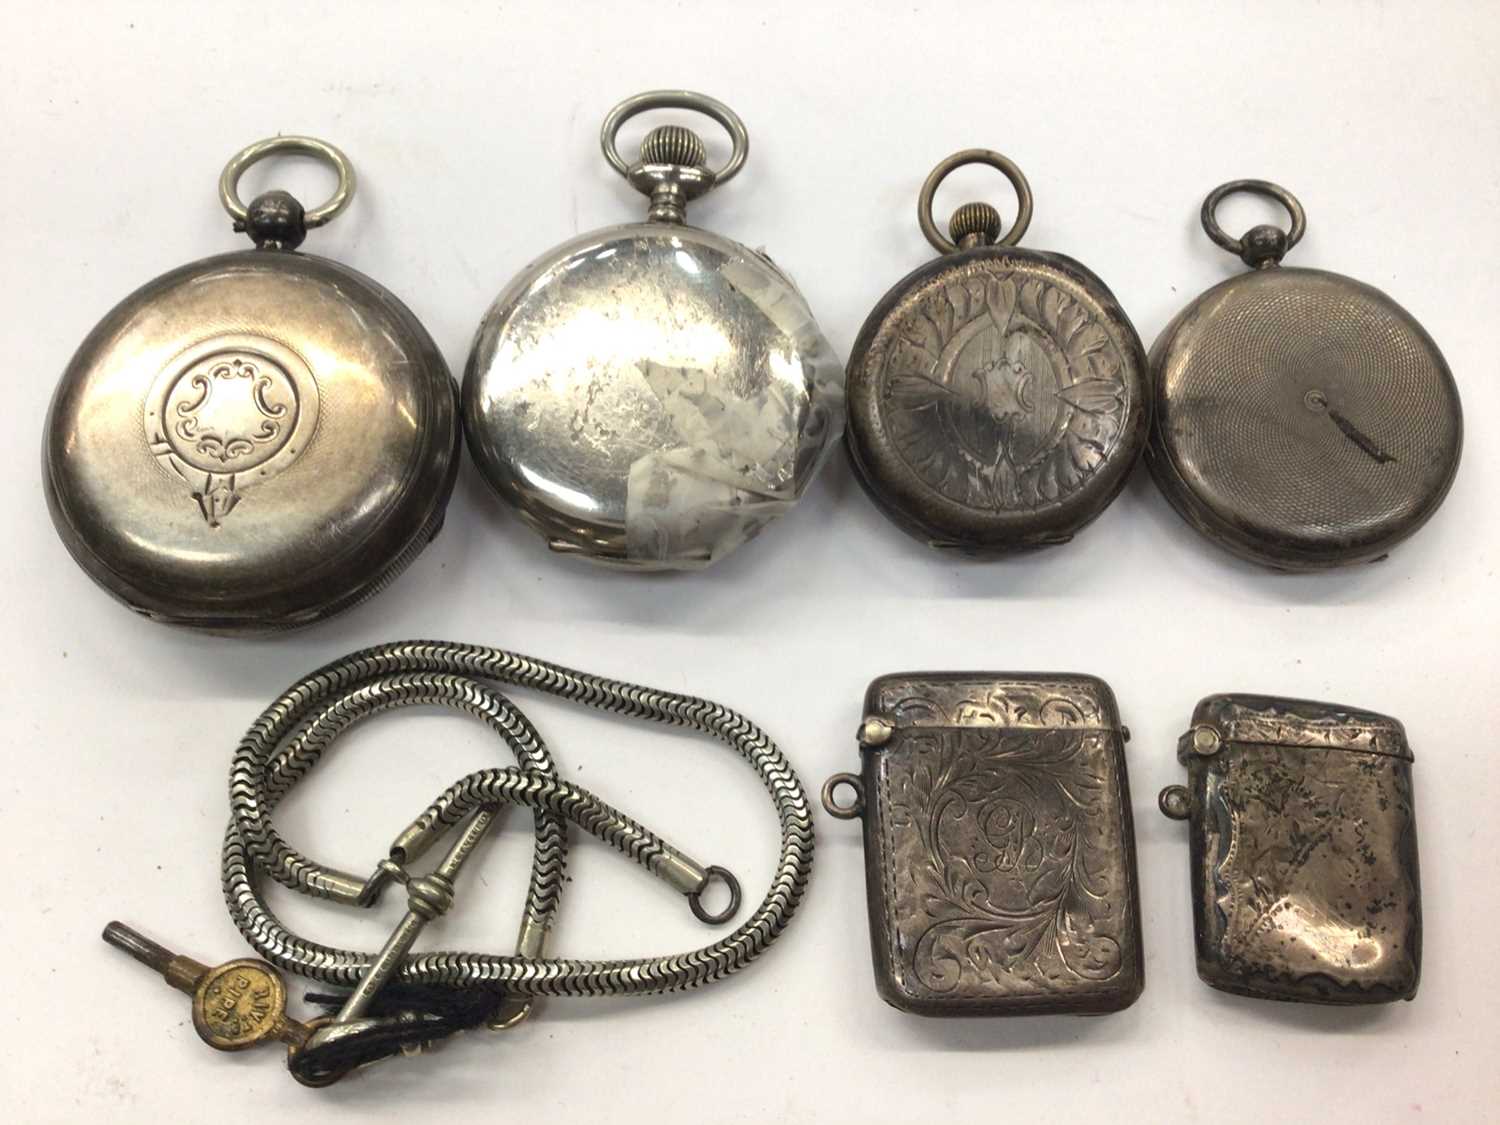 Silver cased pocket watch, Hebidomas pocket watch, a silver cased fob watch and one other in a white - Image 4 of 4